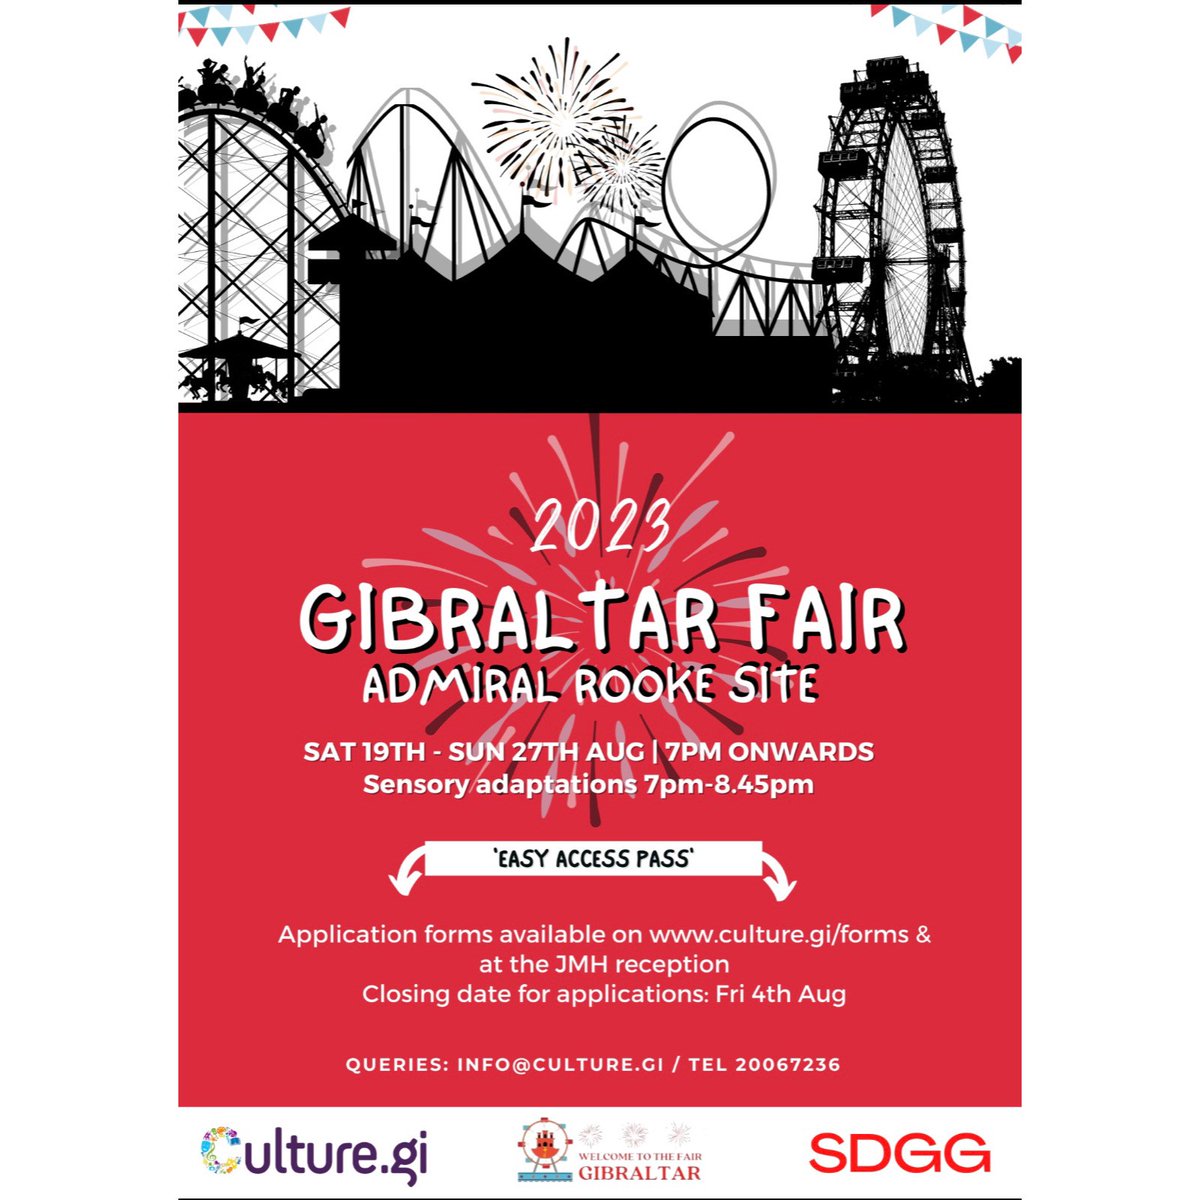 Gibraltar Fair 2023 – Sat 19th to Sun 27th Aug 2023 Sensory adaptations will be available from 7pm to 8.45pm, during which period lights will be switched off and sound minimised. Click here for further details: culture.gi/news/gibraltar…